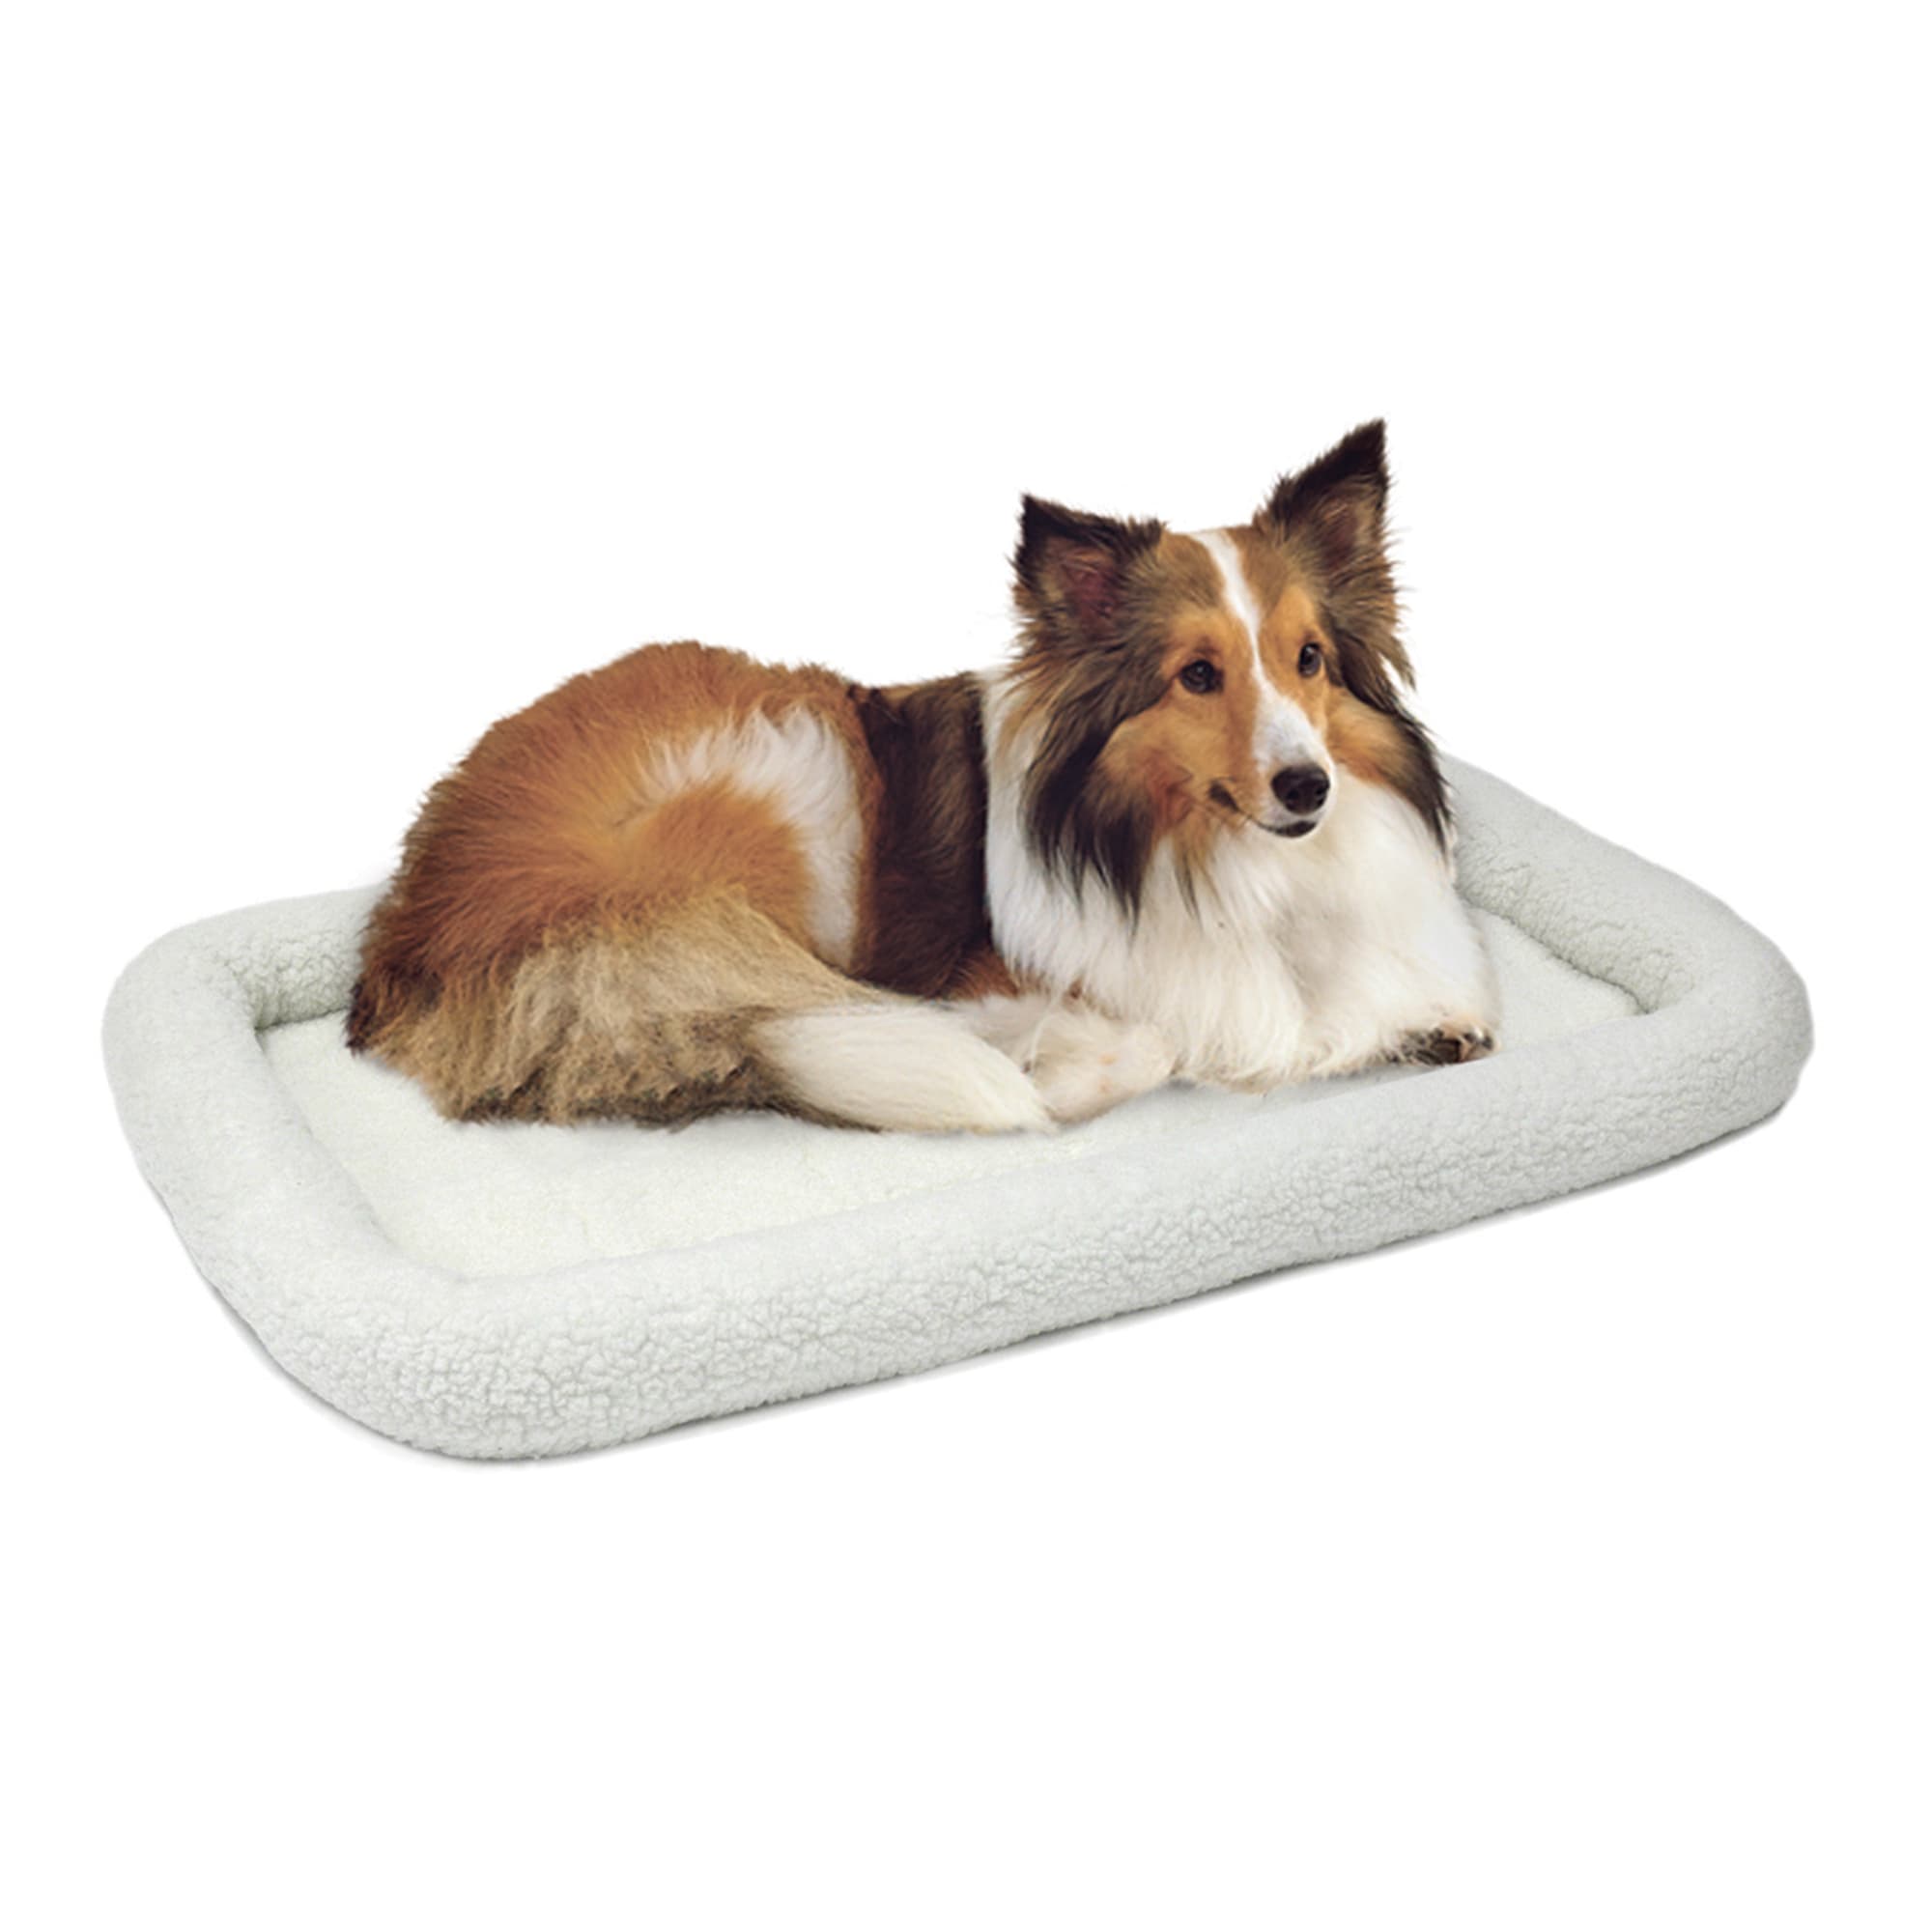 Photos - Dog Bed / Basket Midwest Quiet Time Bolster White Dog Bed, 36" L X 23" W, Large, Wh 